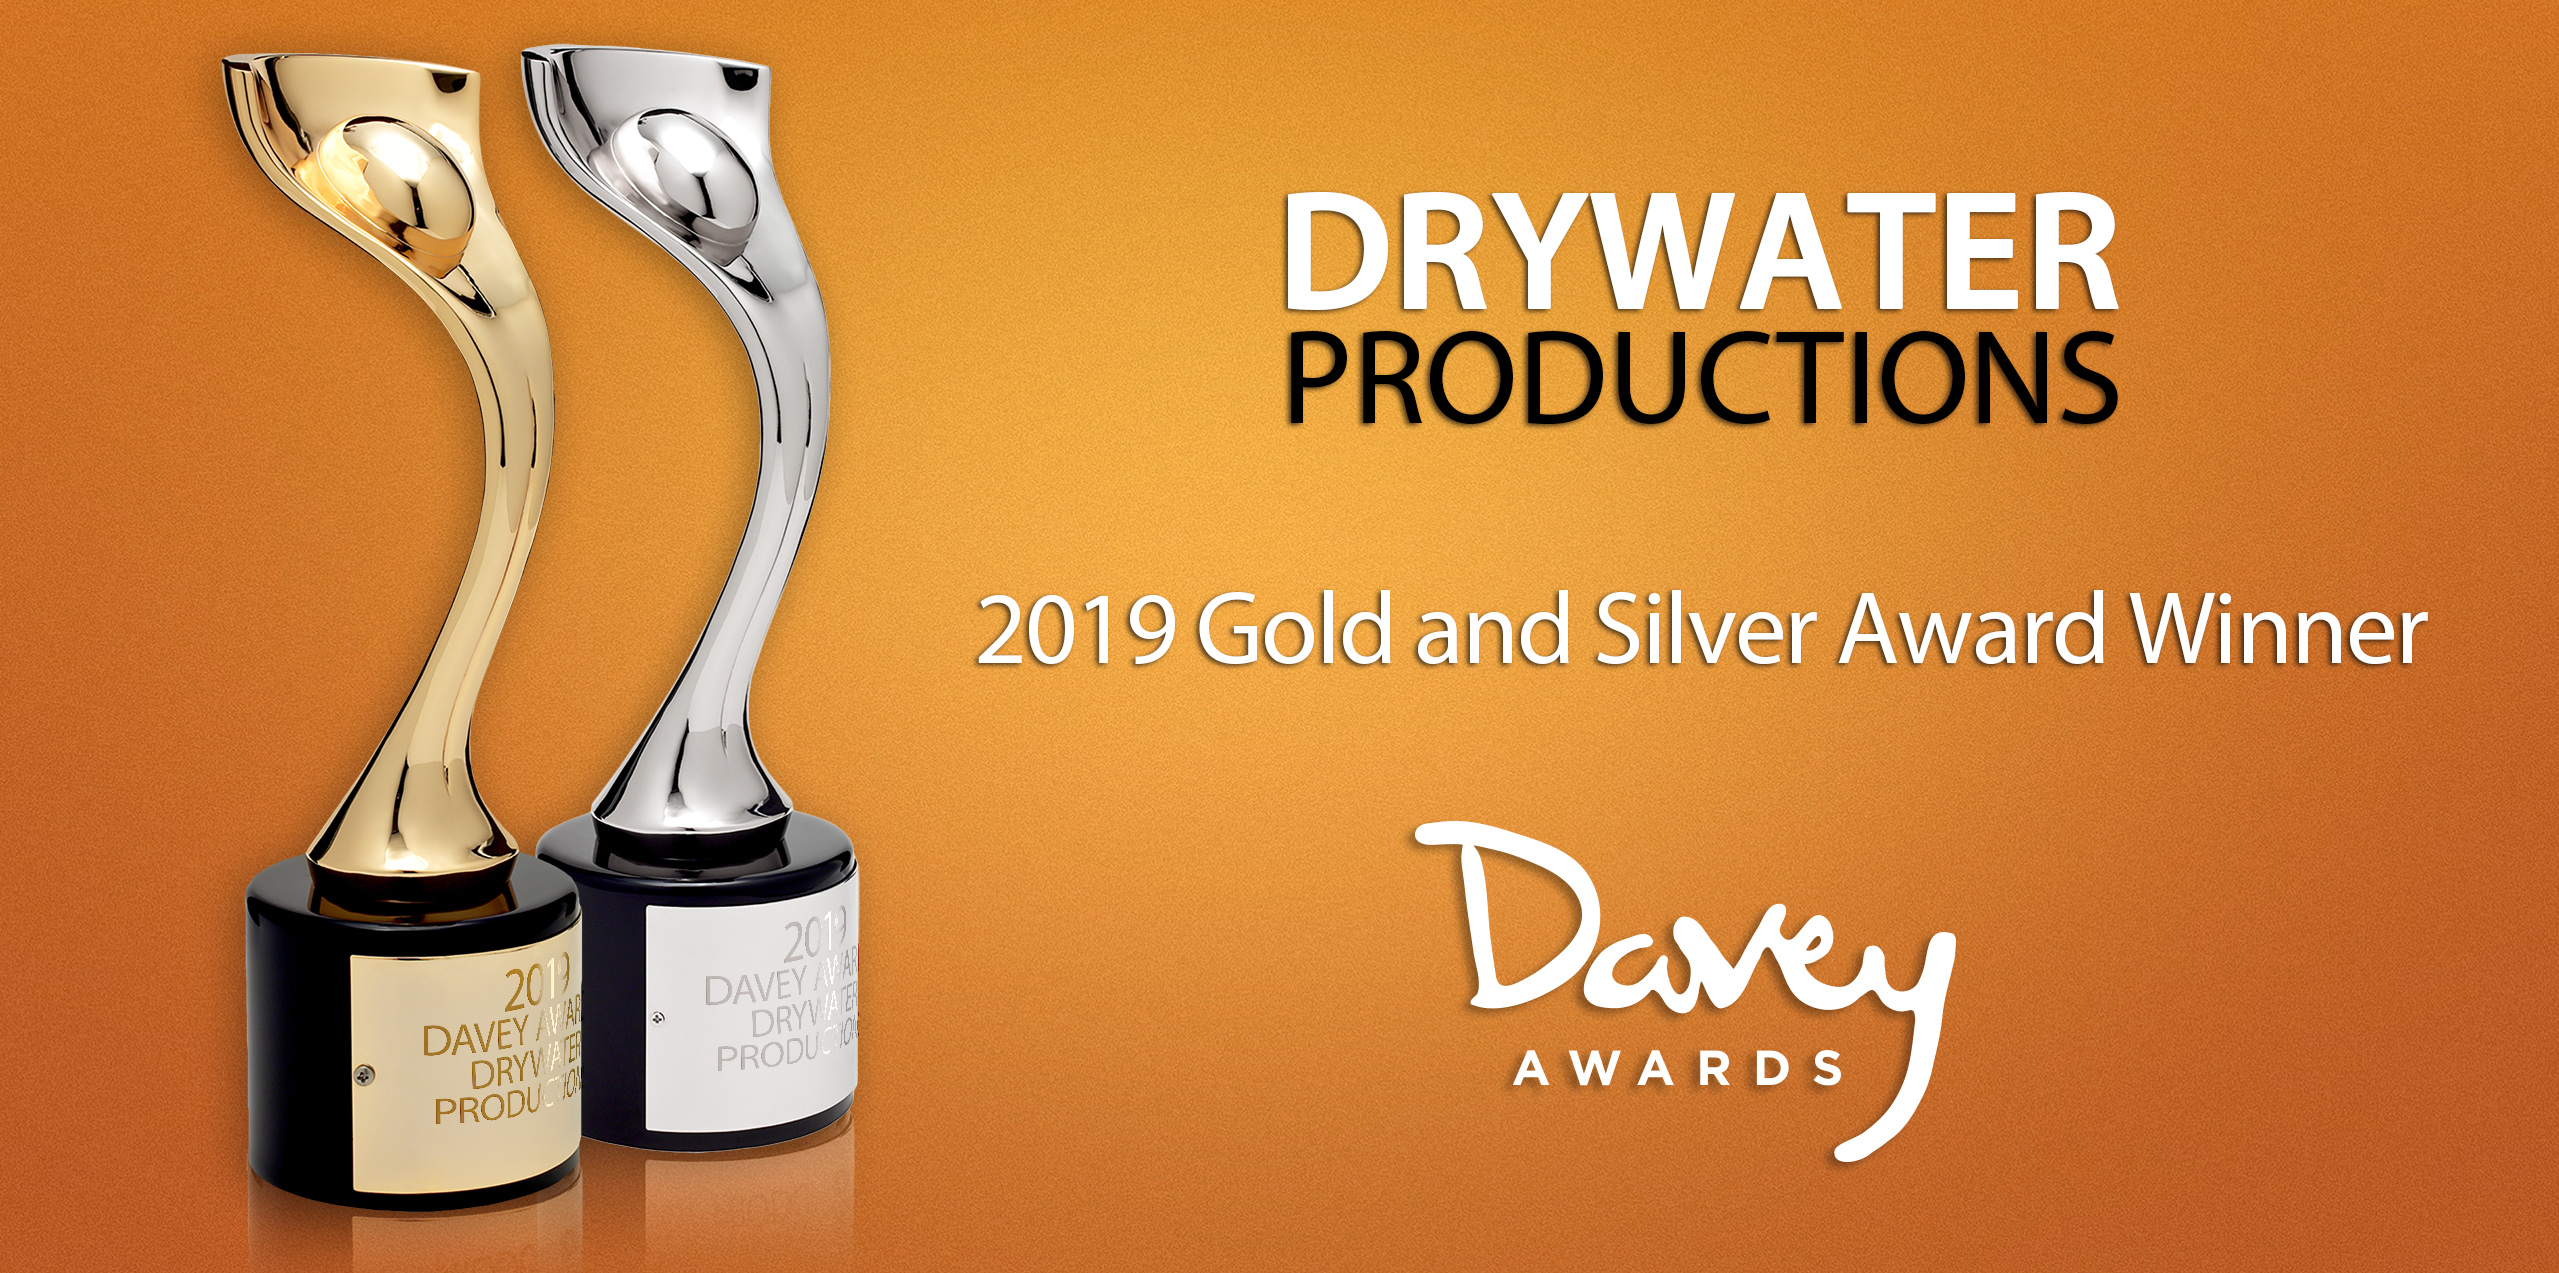 Drywater Productions Receives Two 2019 Davey Awards